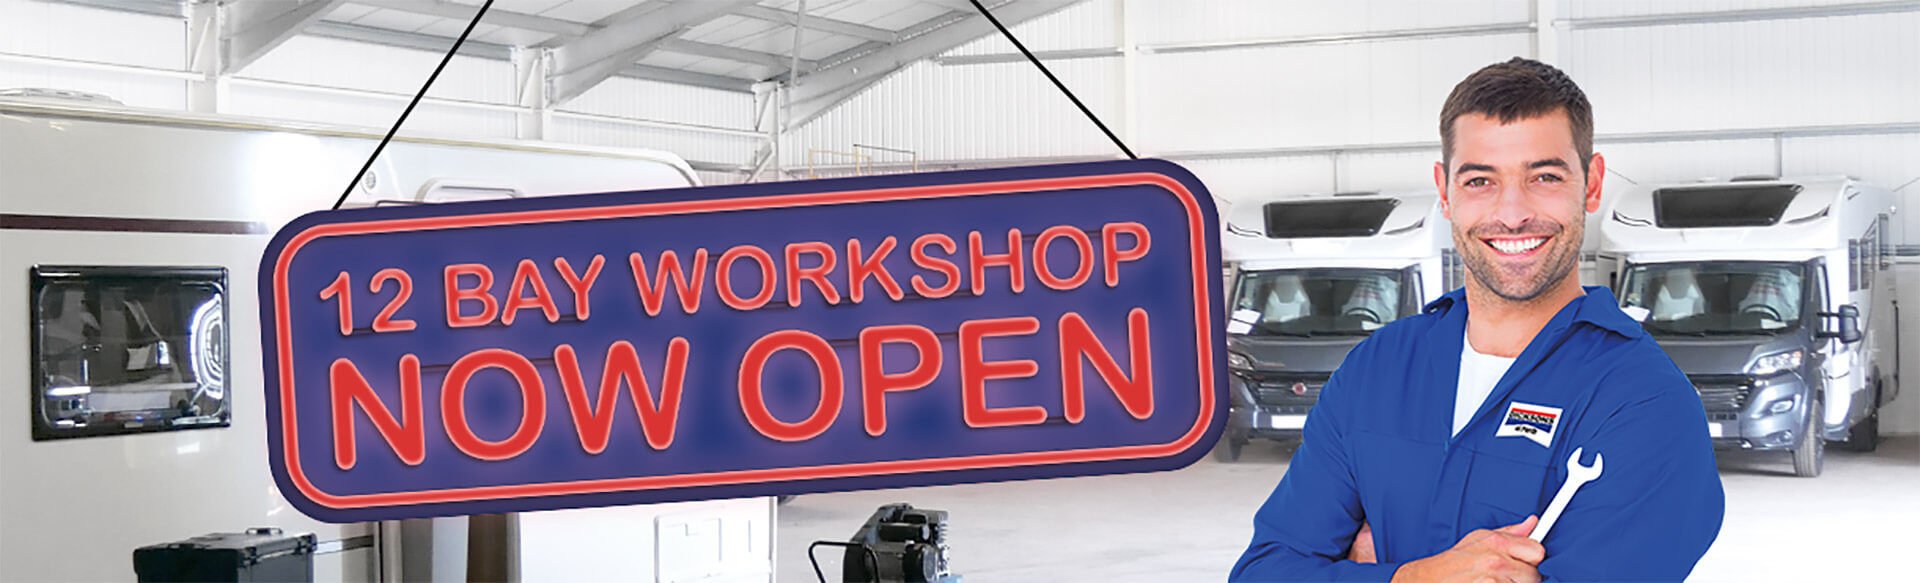 Aftersales - 12 Bay Workshop now open